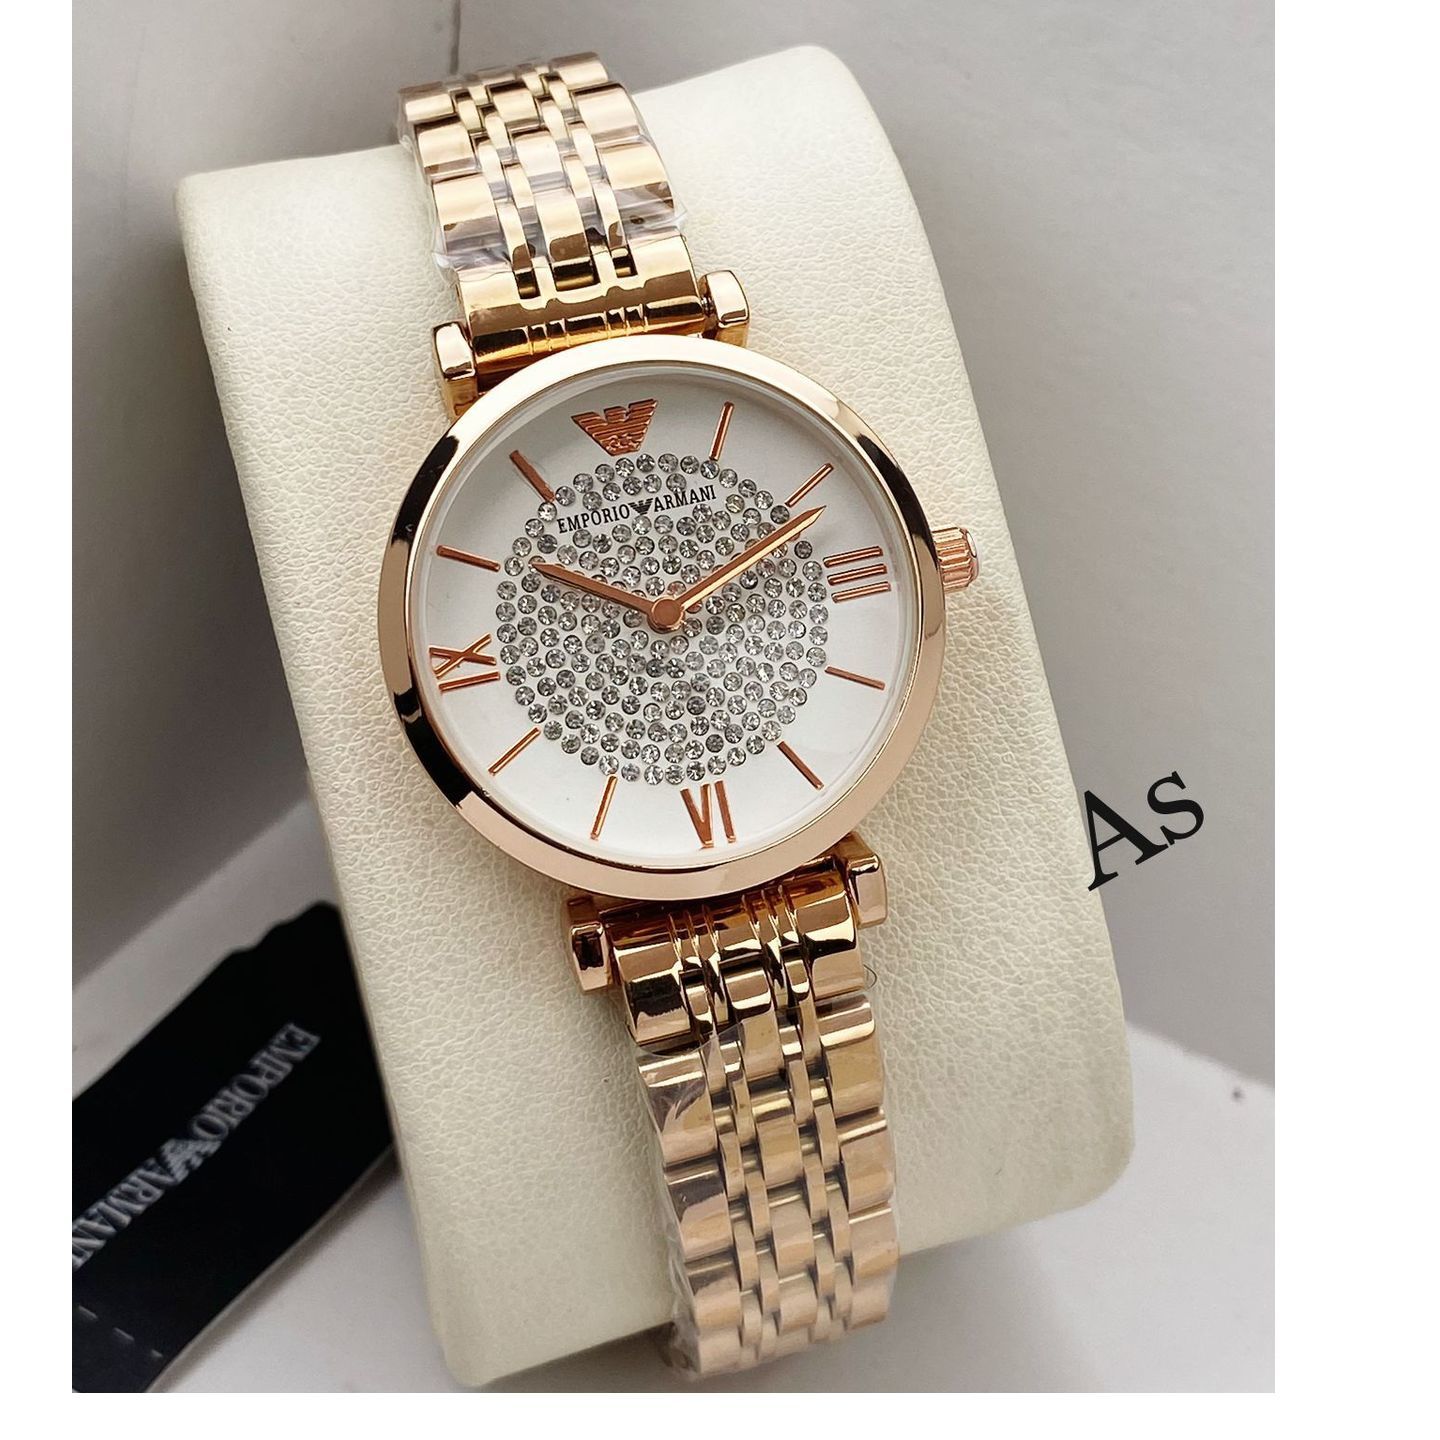 Ladies Rose Gold with White Dial Armani Watch Gift  Engagement, anniversary, valentines day, mothers day for sister, wife,friend,mother, baby shower